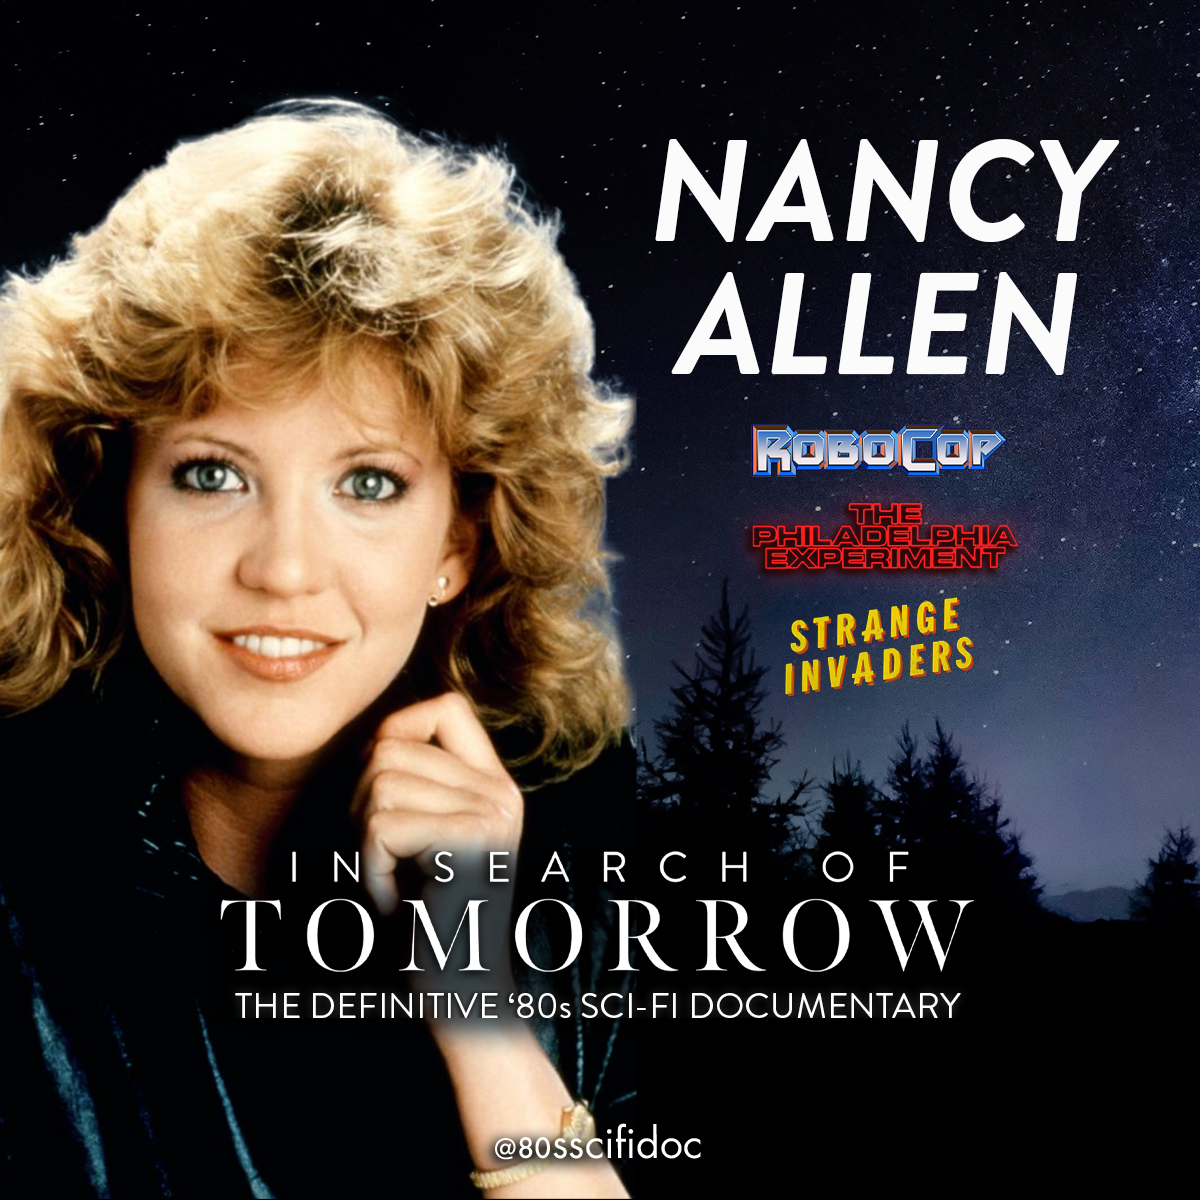 In Search of Tomorrow on Twitter: "Nancy Allen is joining  #InSearchOfTomorrow to talk #RoboCop, Strange Invaders, The Philadelphia  Experiment and her Sci-Fi faves! Follow @80sSciFiDoc for more... #80s  #SciFi #movies #nancyallen https://t.co/Fk01gAsAgq" /